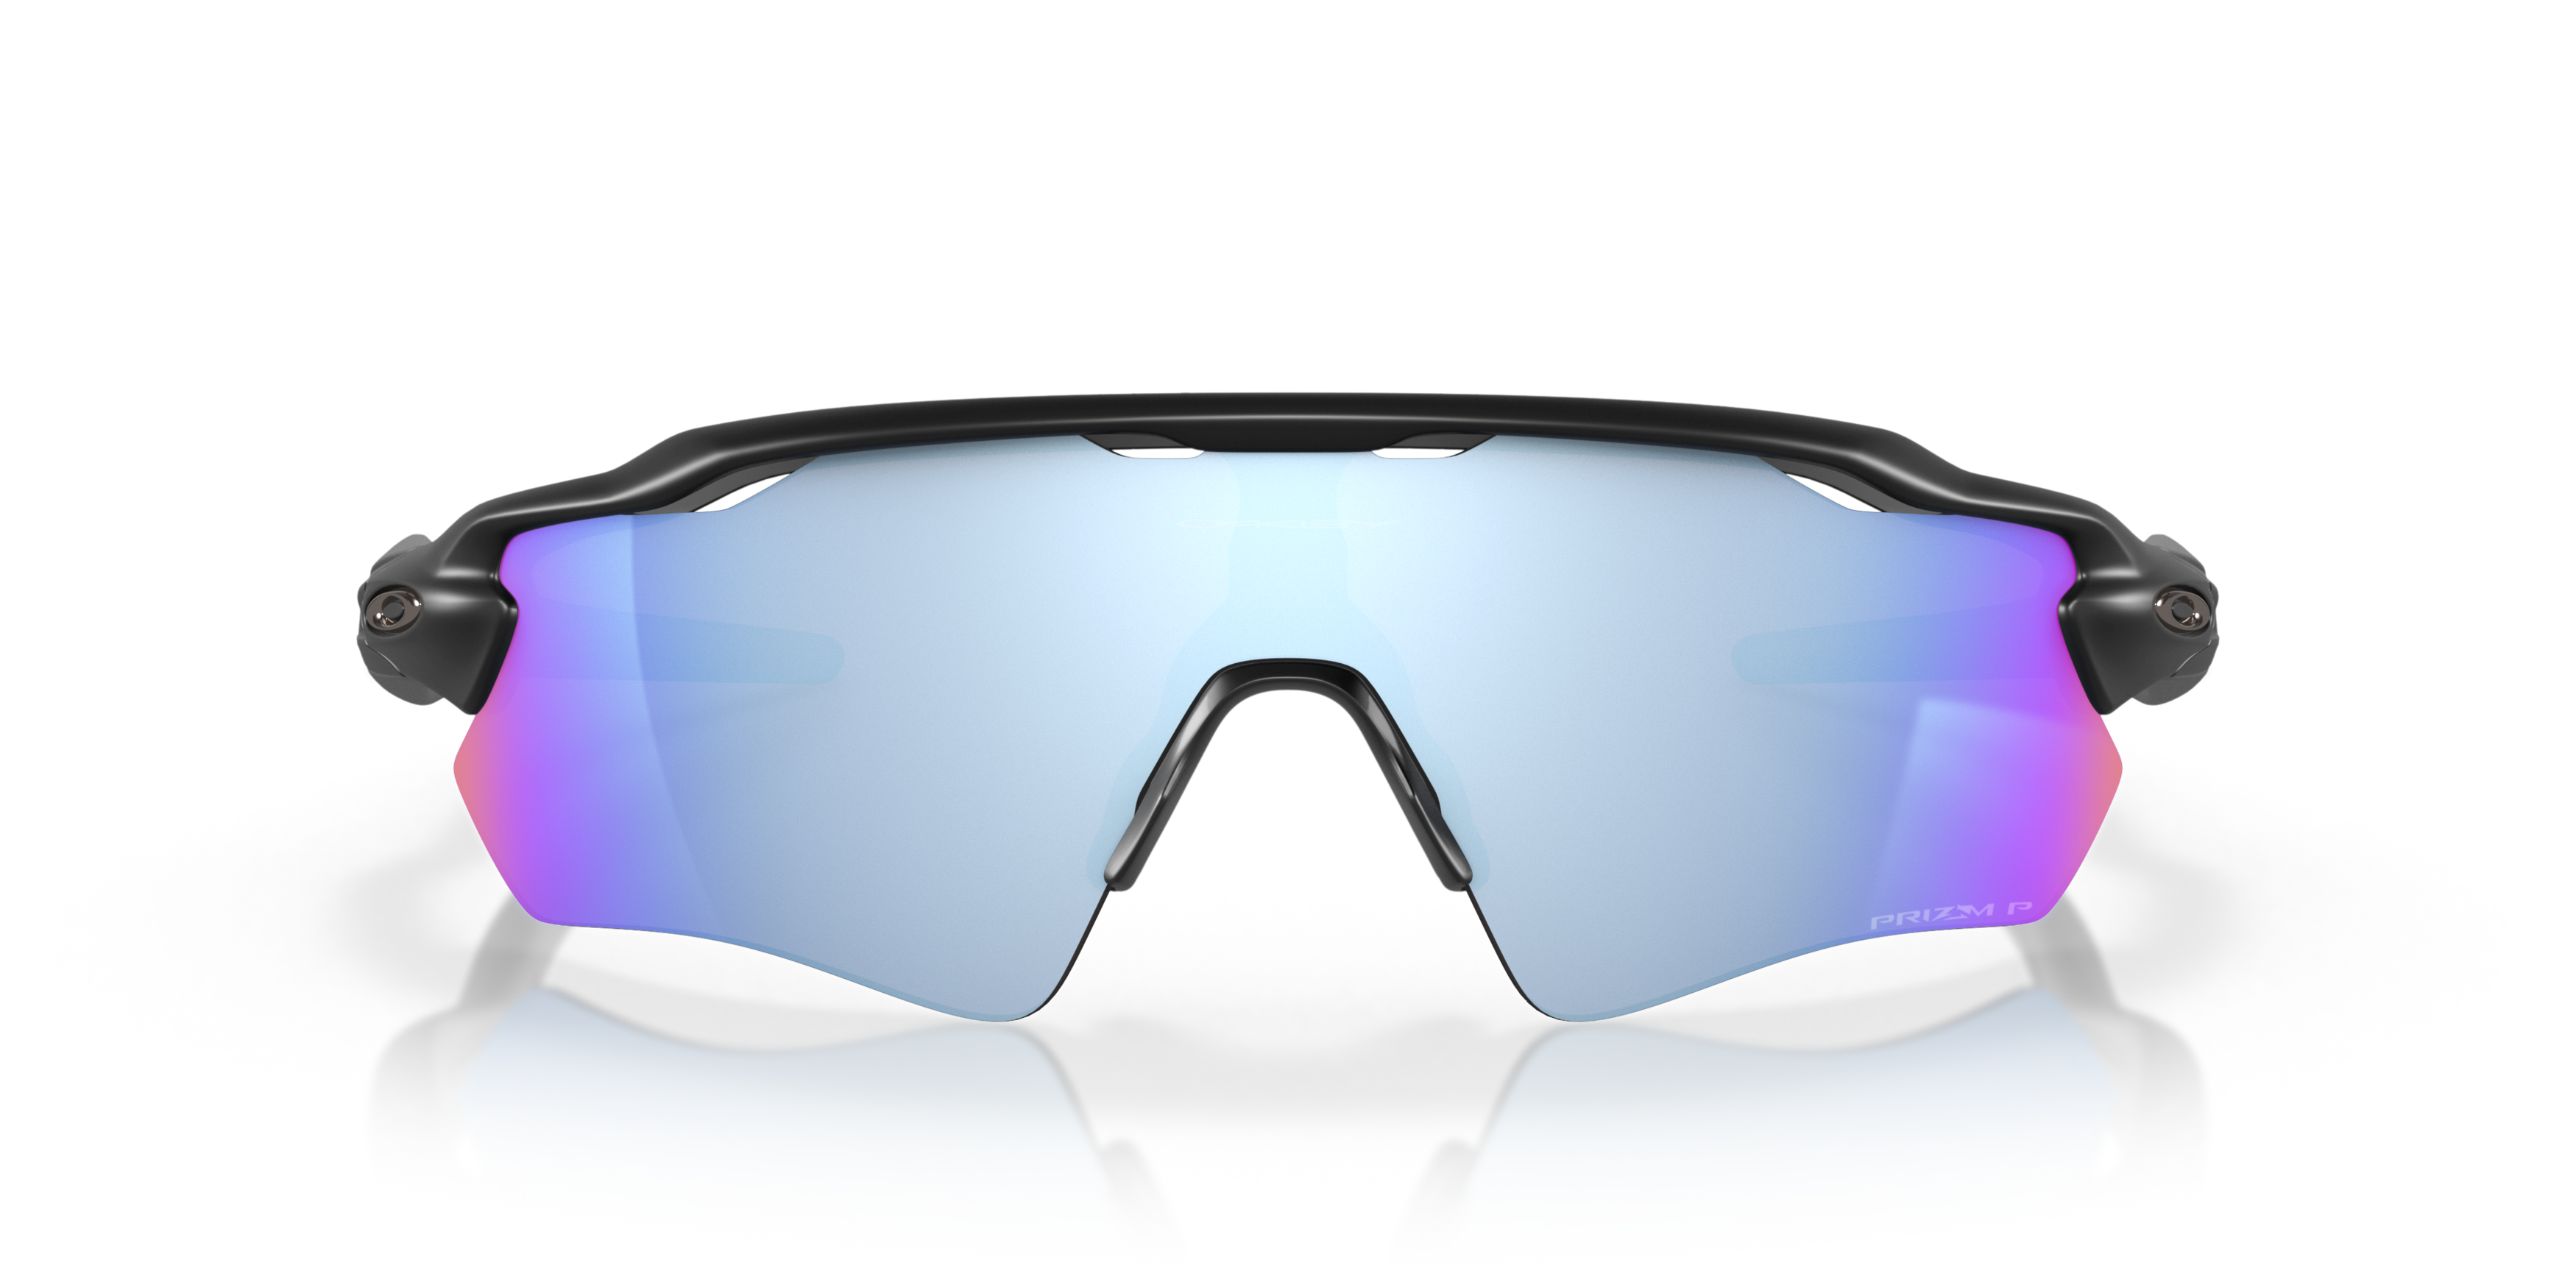 [products.image.front] Oakley Radar OO 9208 Sunglasses